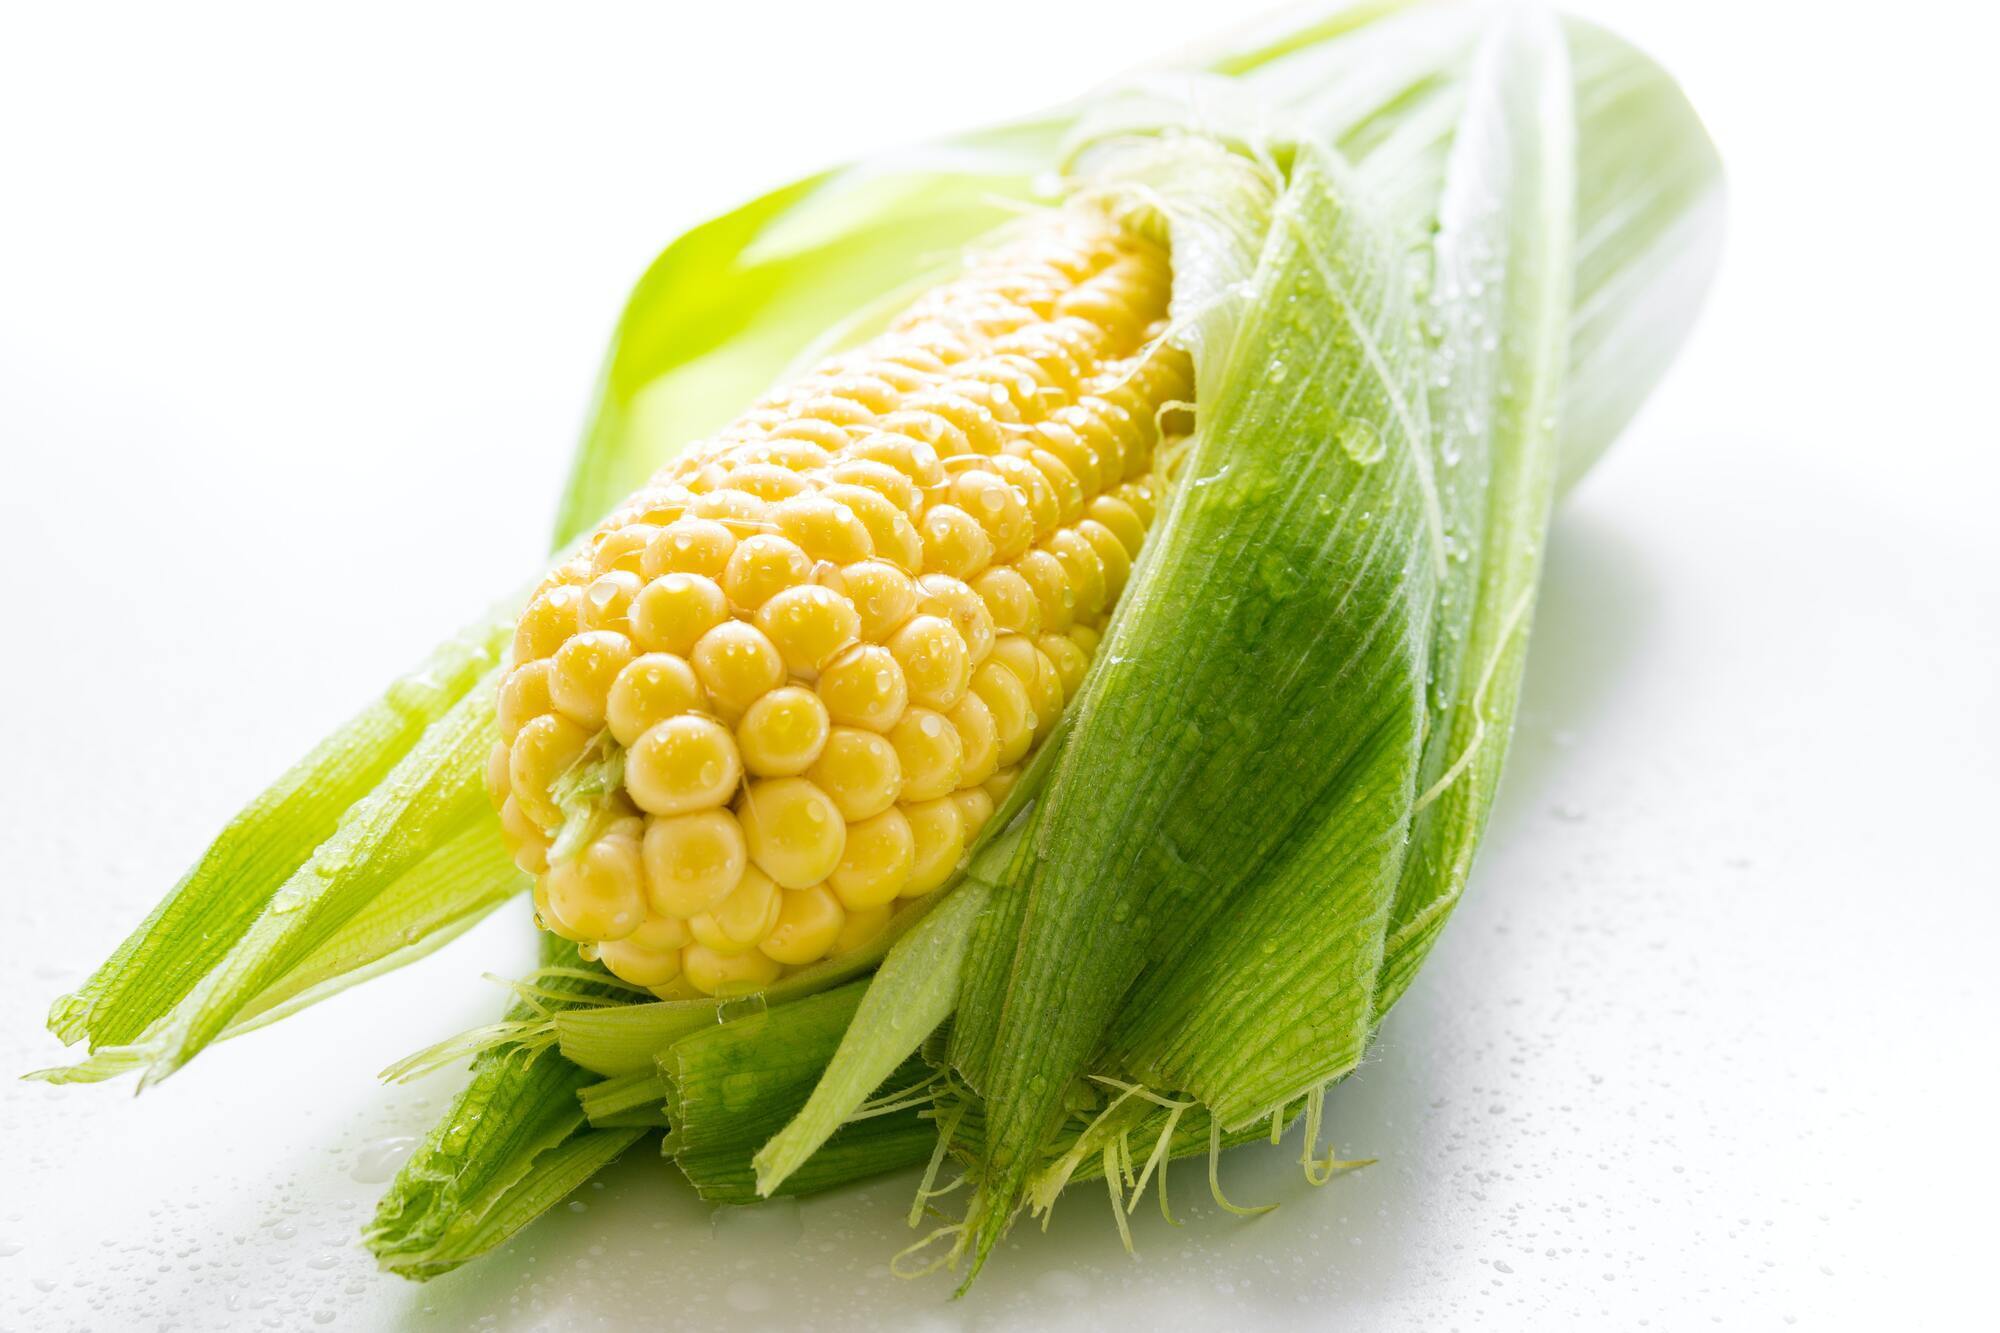 How to can corn deliciously for the winter: to salads, cutlets and casseroles